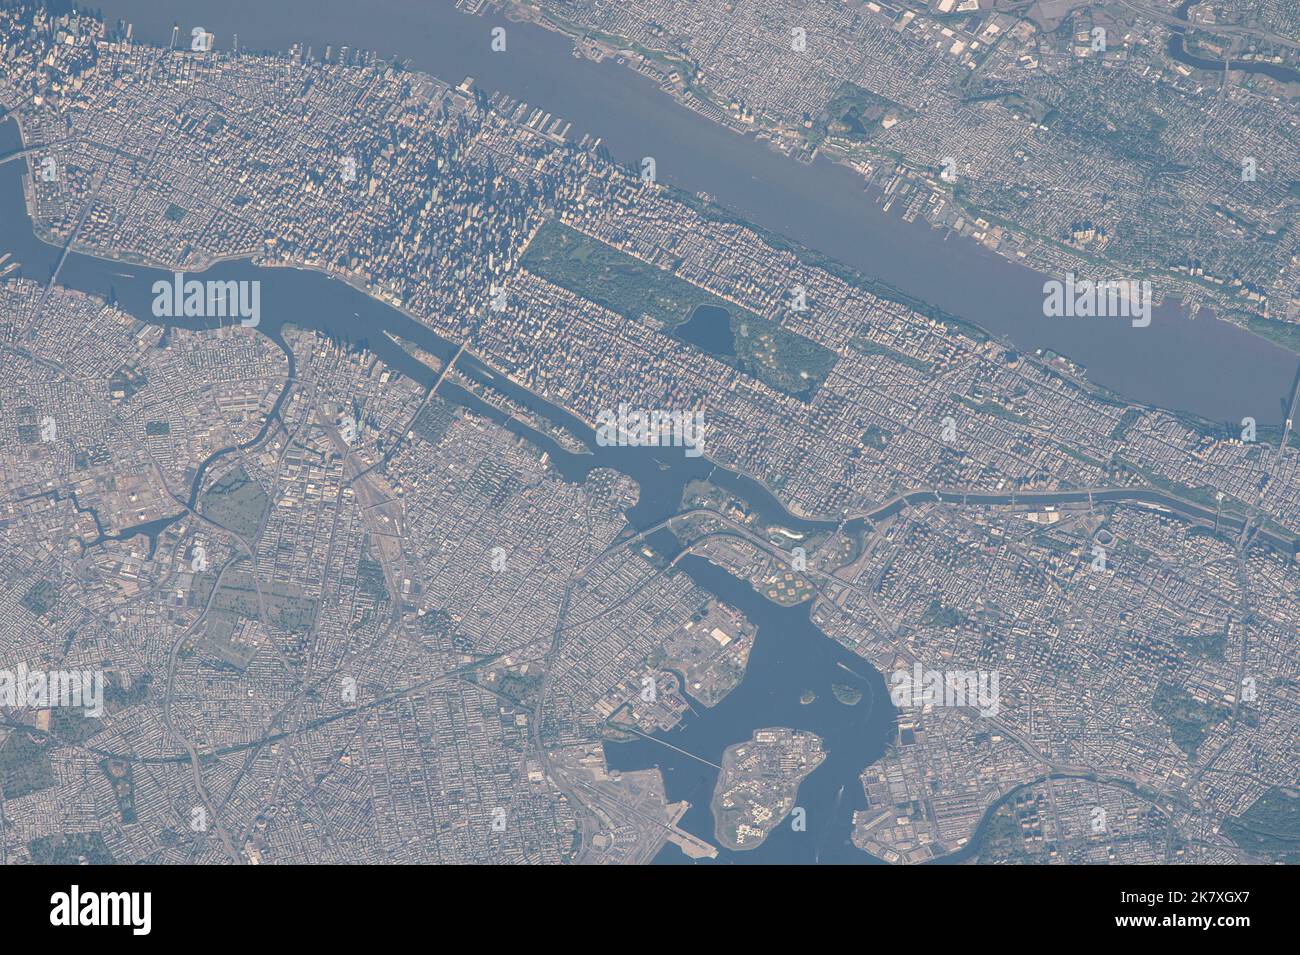 New York City, New York viewed from space Stock Photo